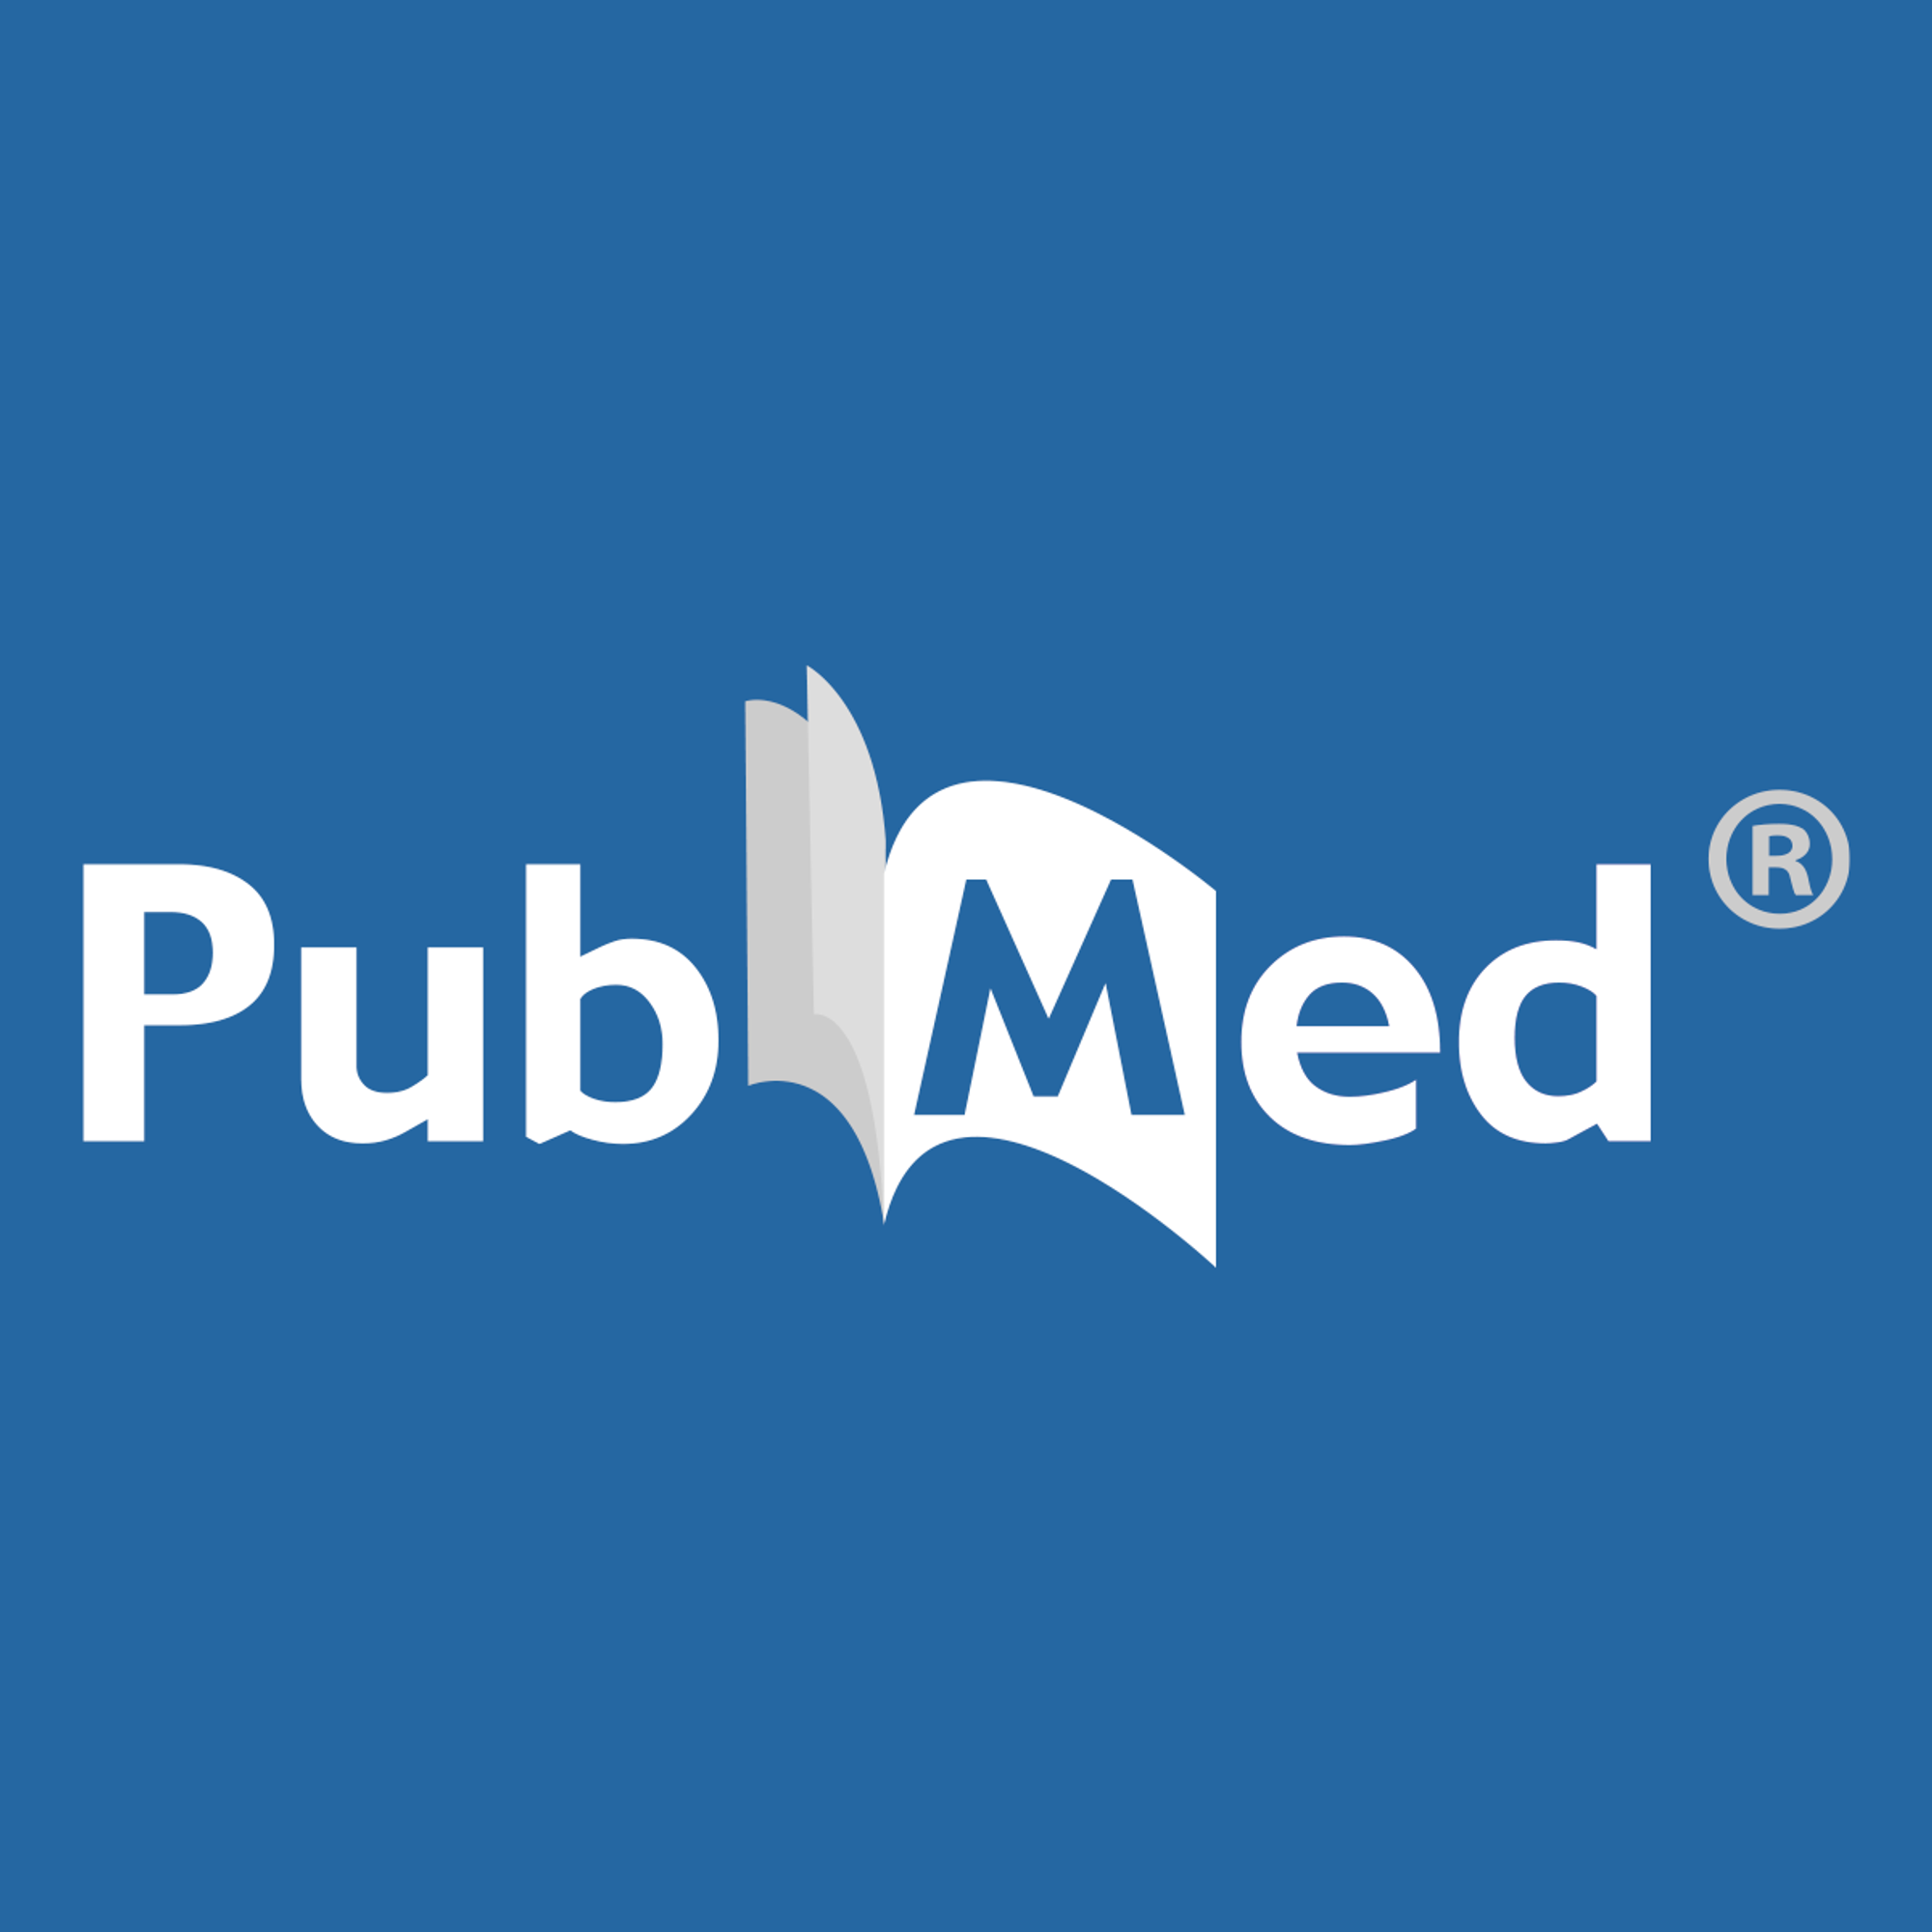 Knowing--in medicine - PubMed